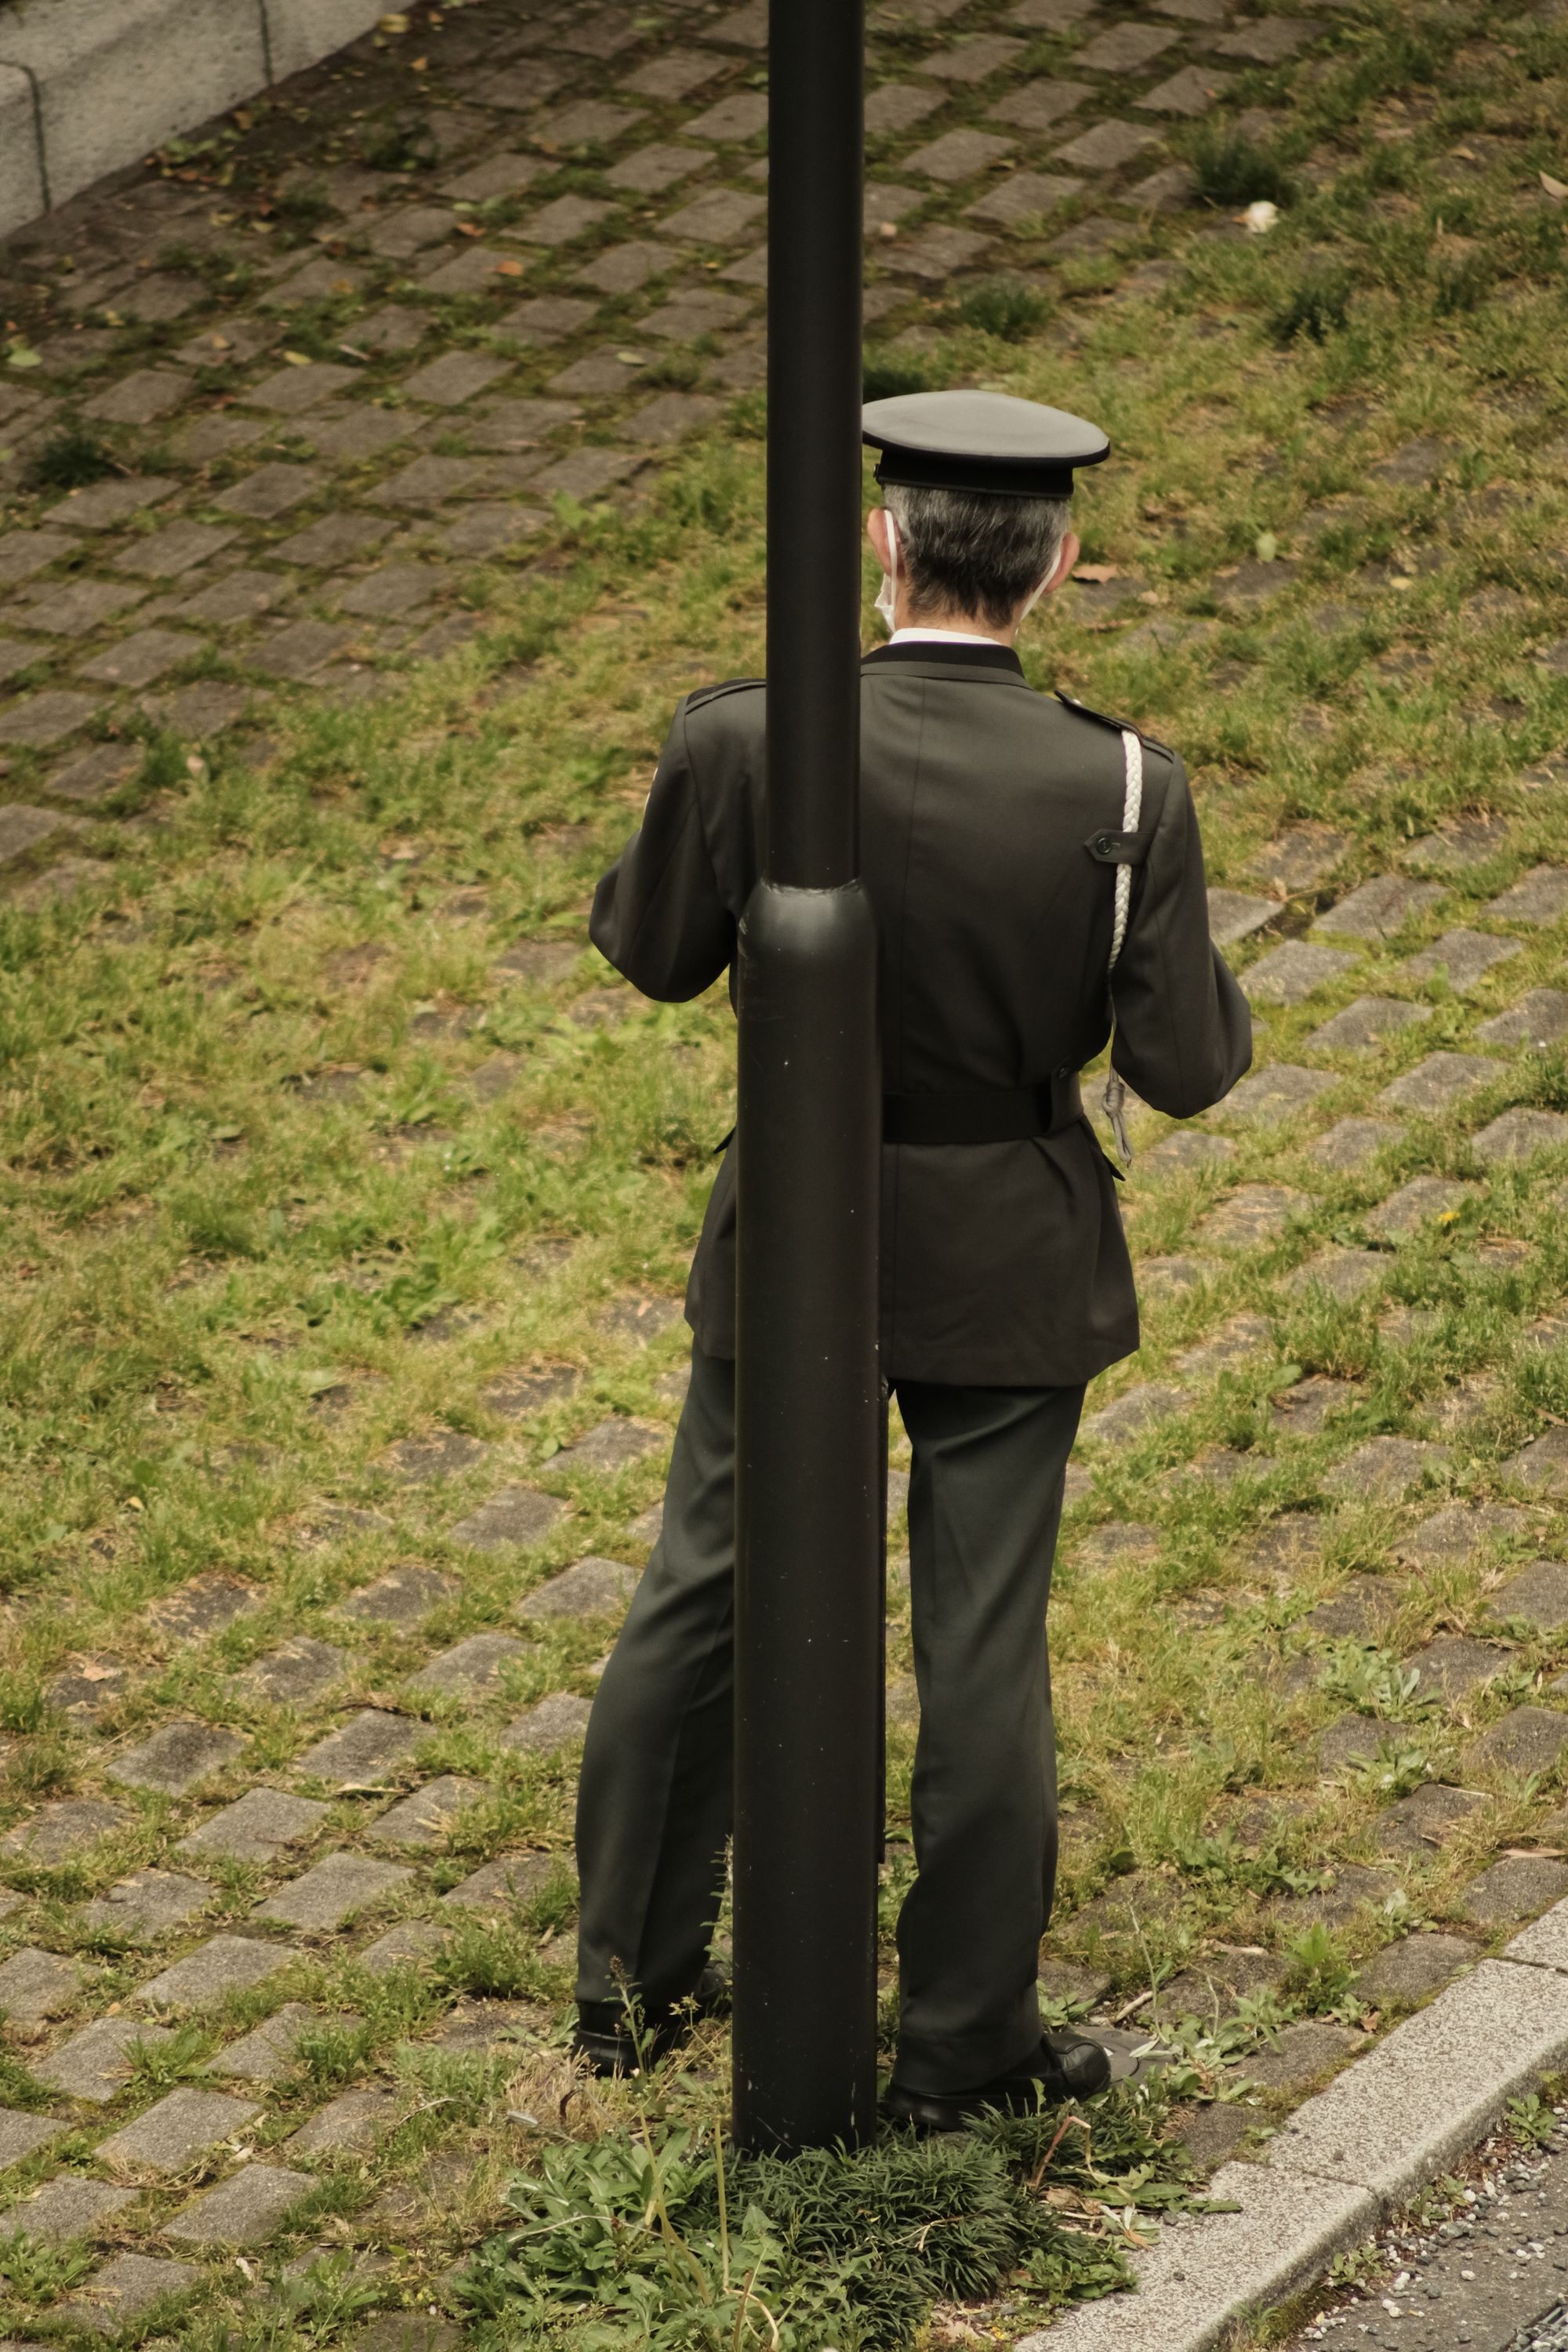 Japanese security guard next to a pole